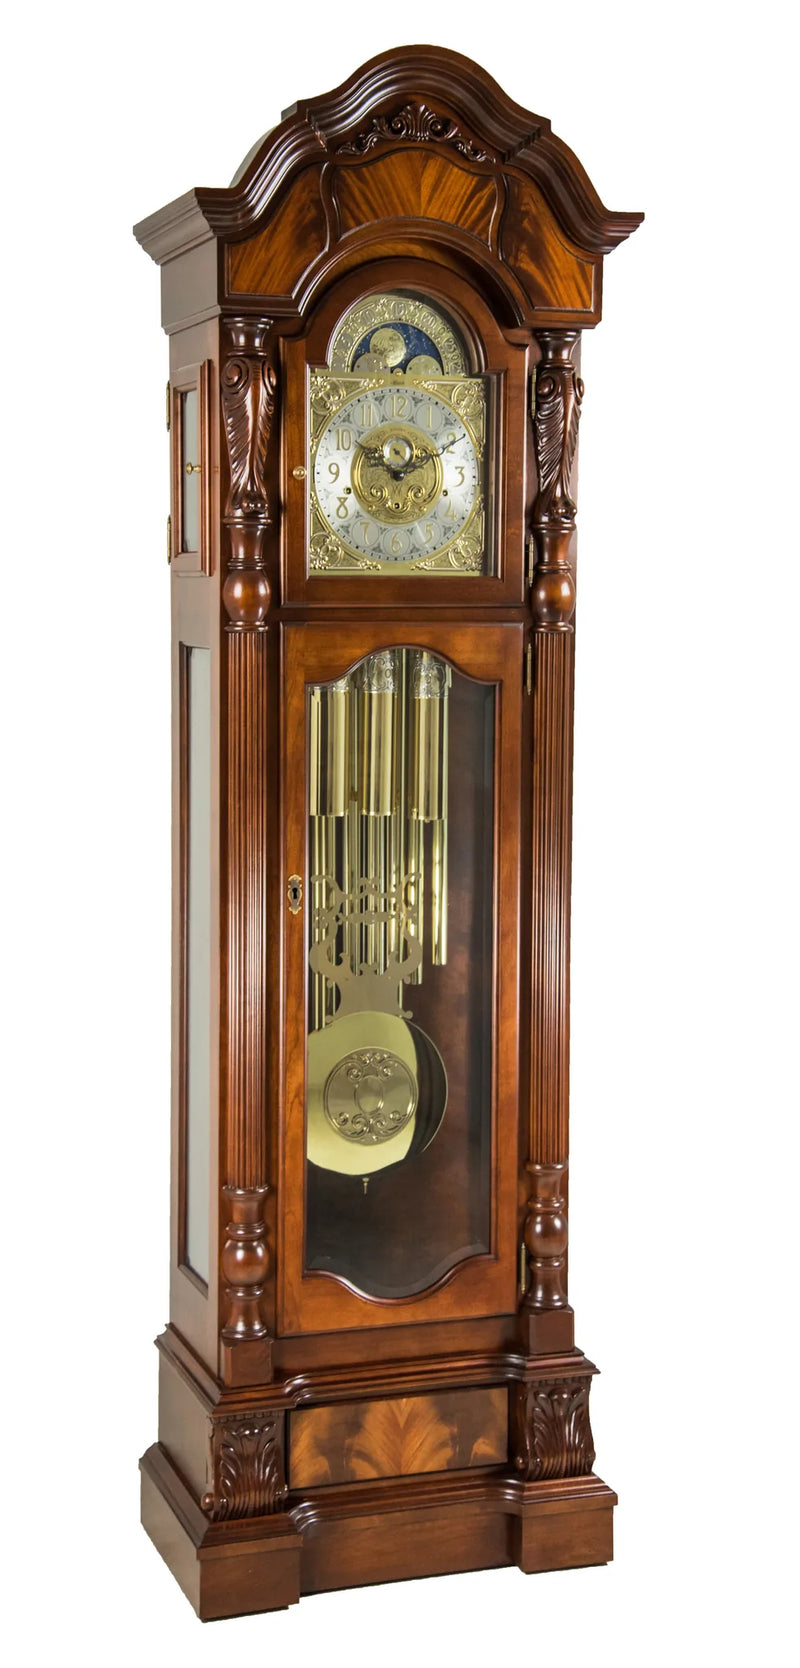 10953-N91171 - Hermle Anstead Grandfather Clock in Cherry